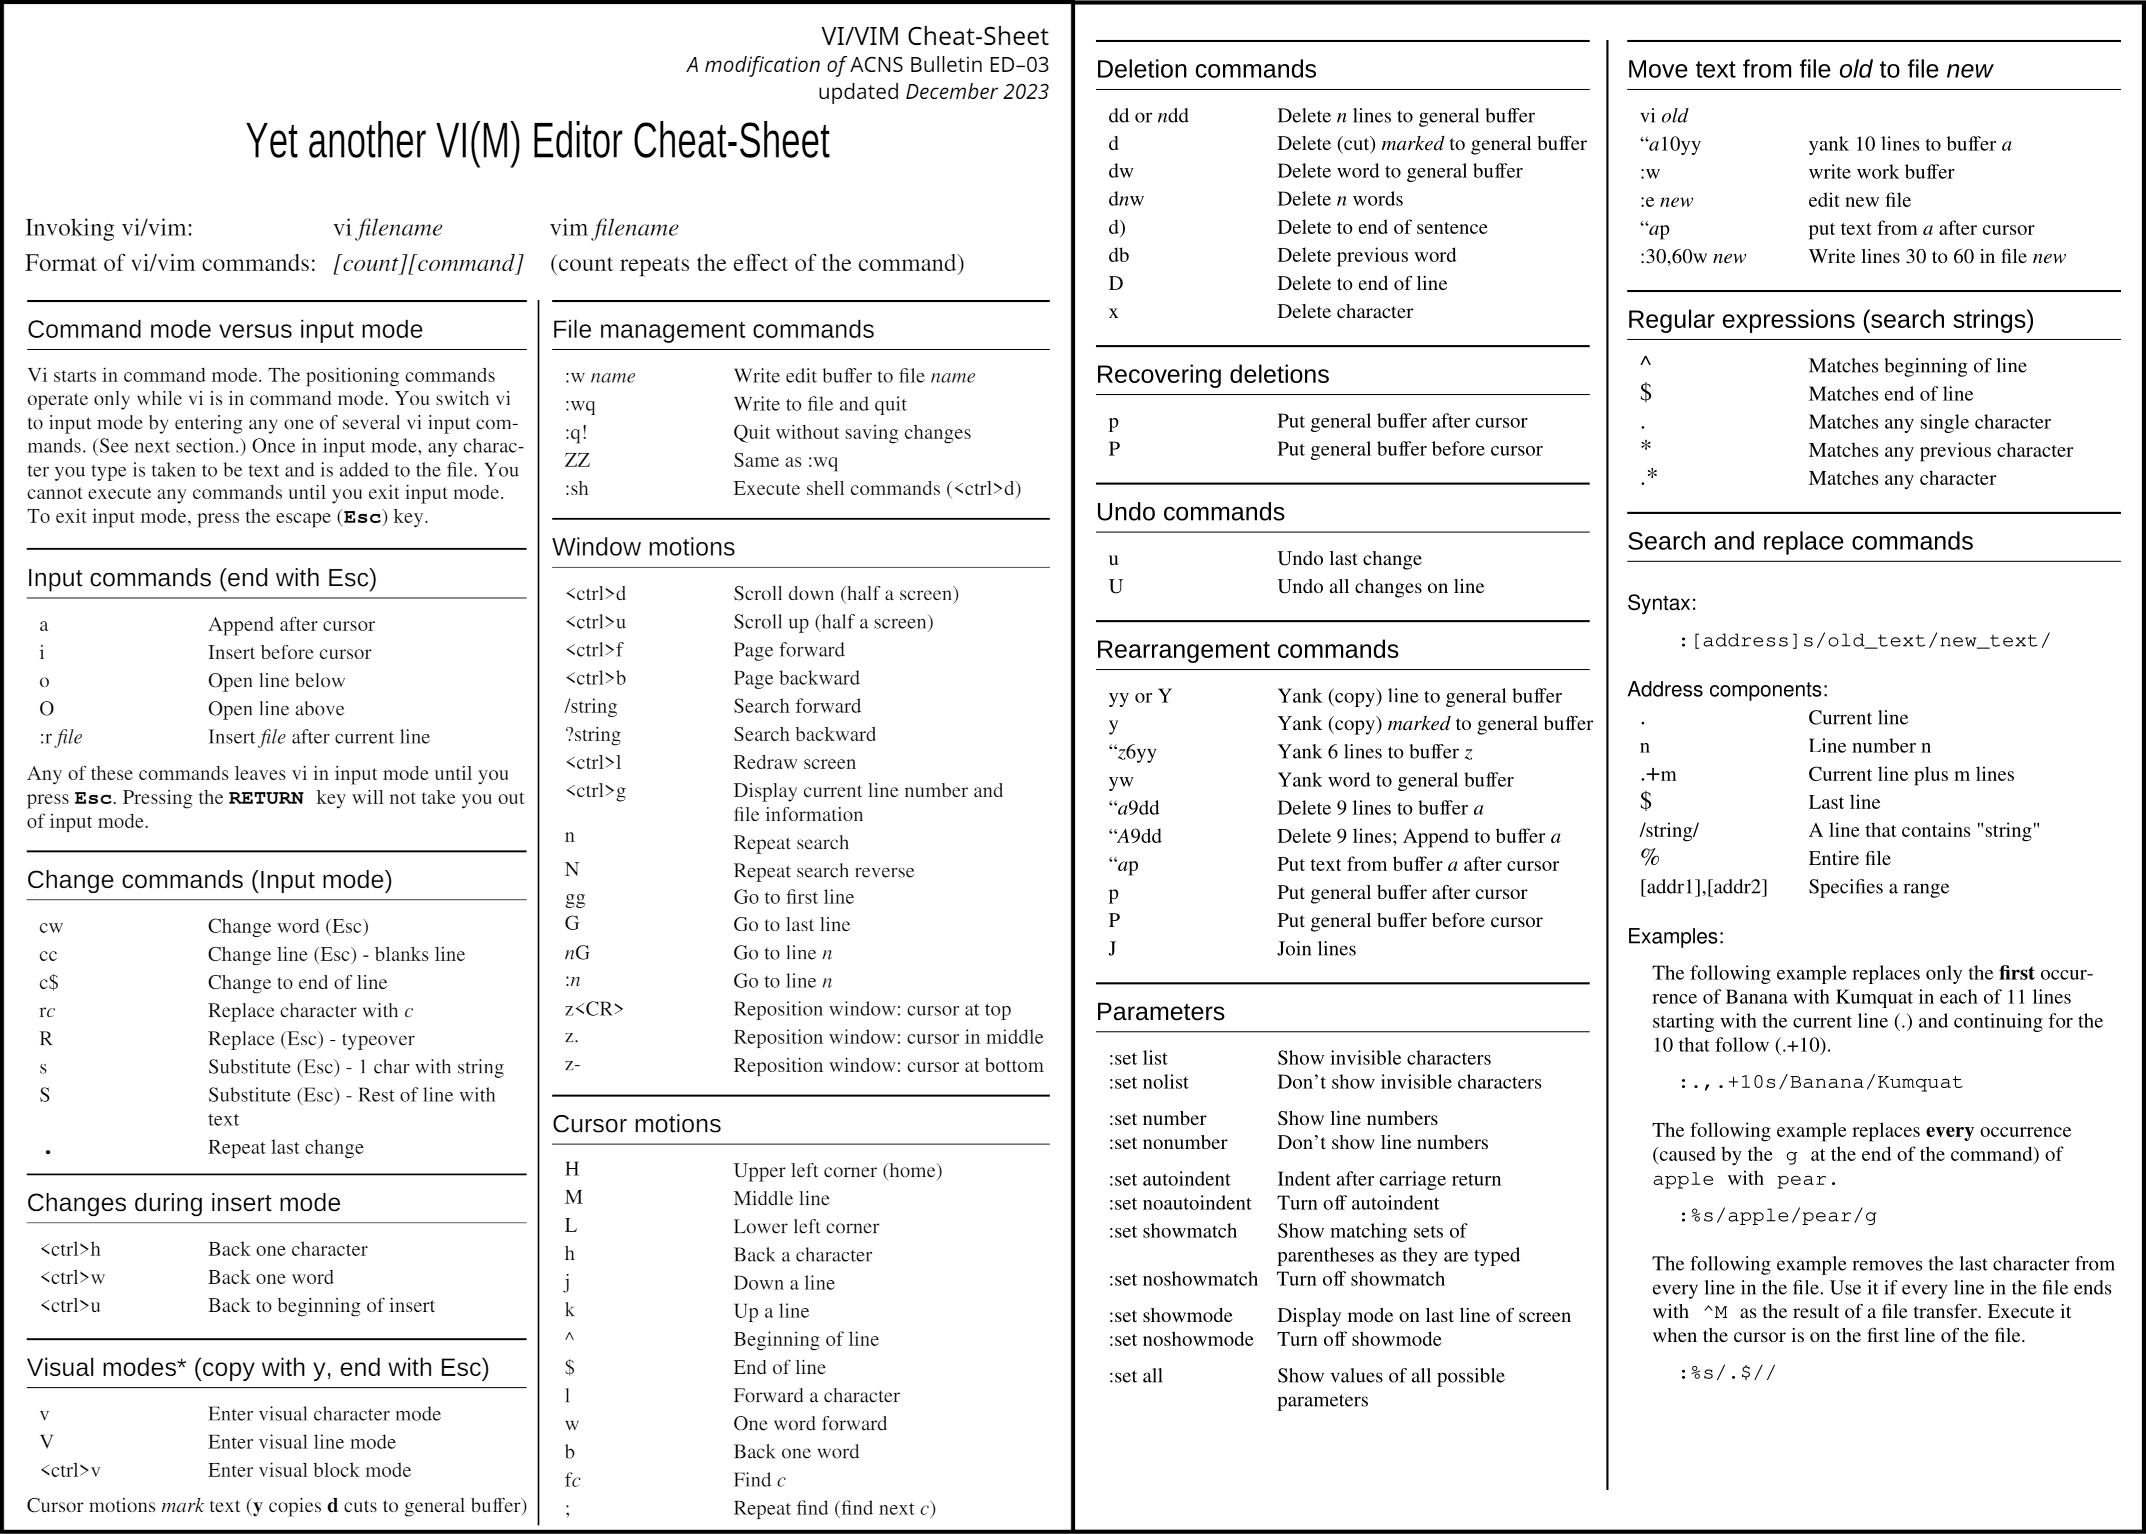 Yet another vi(m) cheat sheet